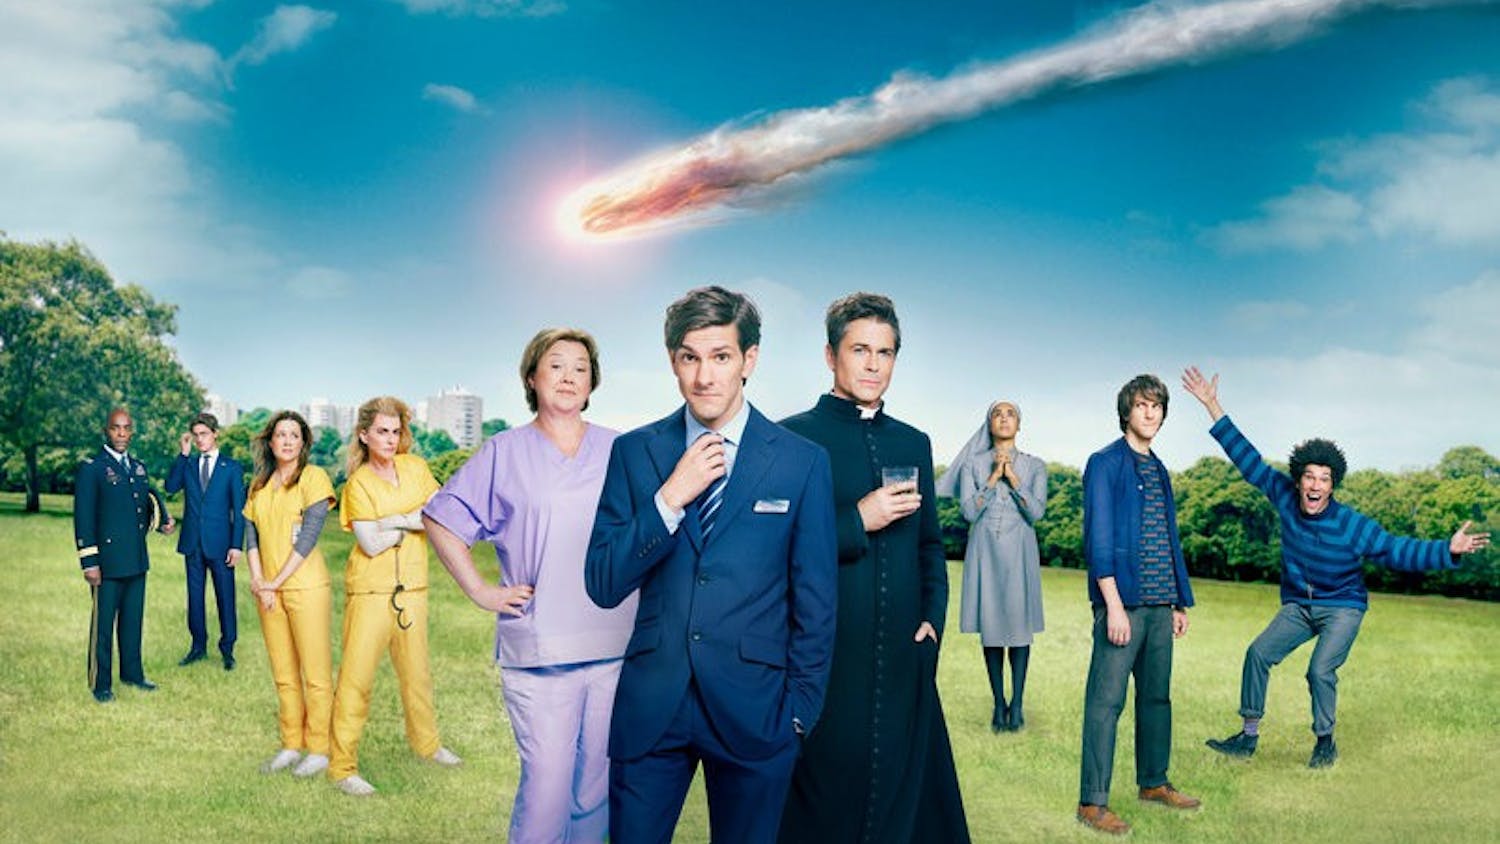 "You, Me and the Apocalypse" is a bold, adrenaline-fueled, hour-long comedic drama about the last days of mankind. When the news is announced that a comet is on an unavoidable collision course with Earth, a hilarious chain of events is set in motion as an eclectic group of seemingly unconnected characters begin to intersect in unexpected ways.